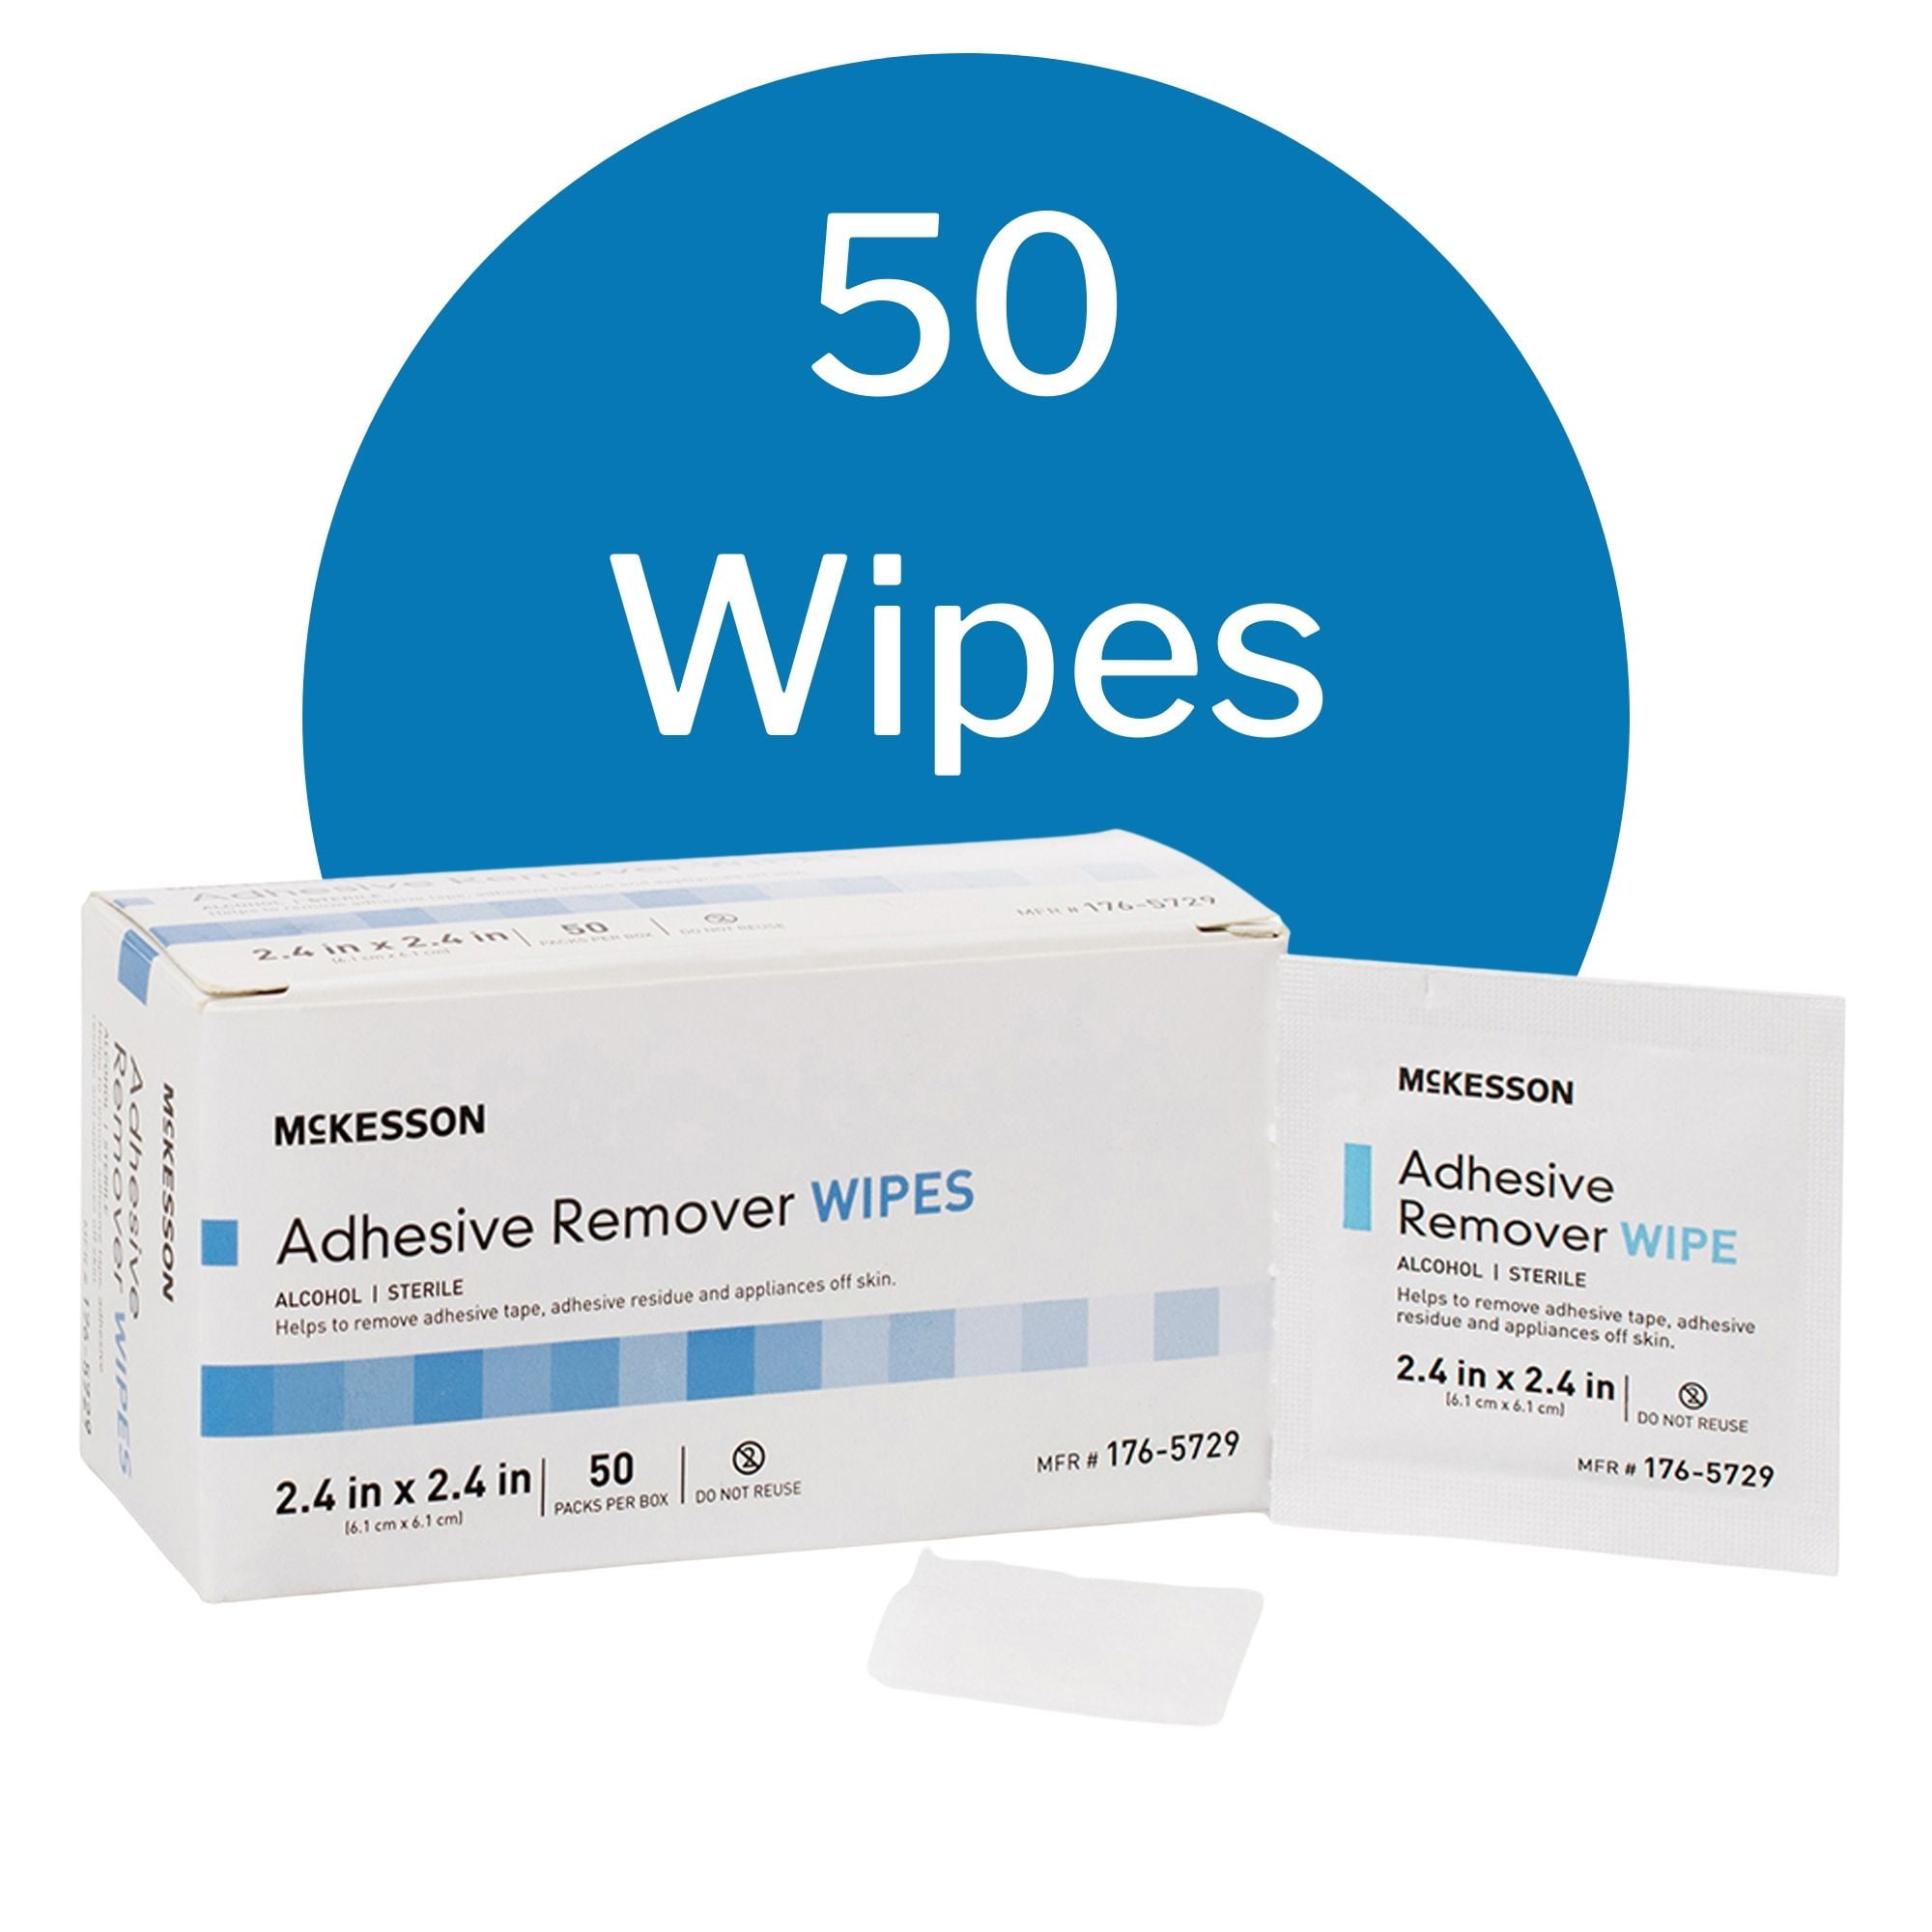 McKesson Adhesive Remover Wipes, Gentle Alcohol Solution, 2.4 in x 2.4 in,  50 Wipes